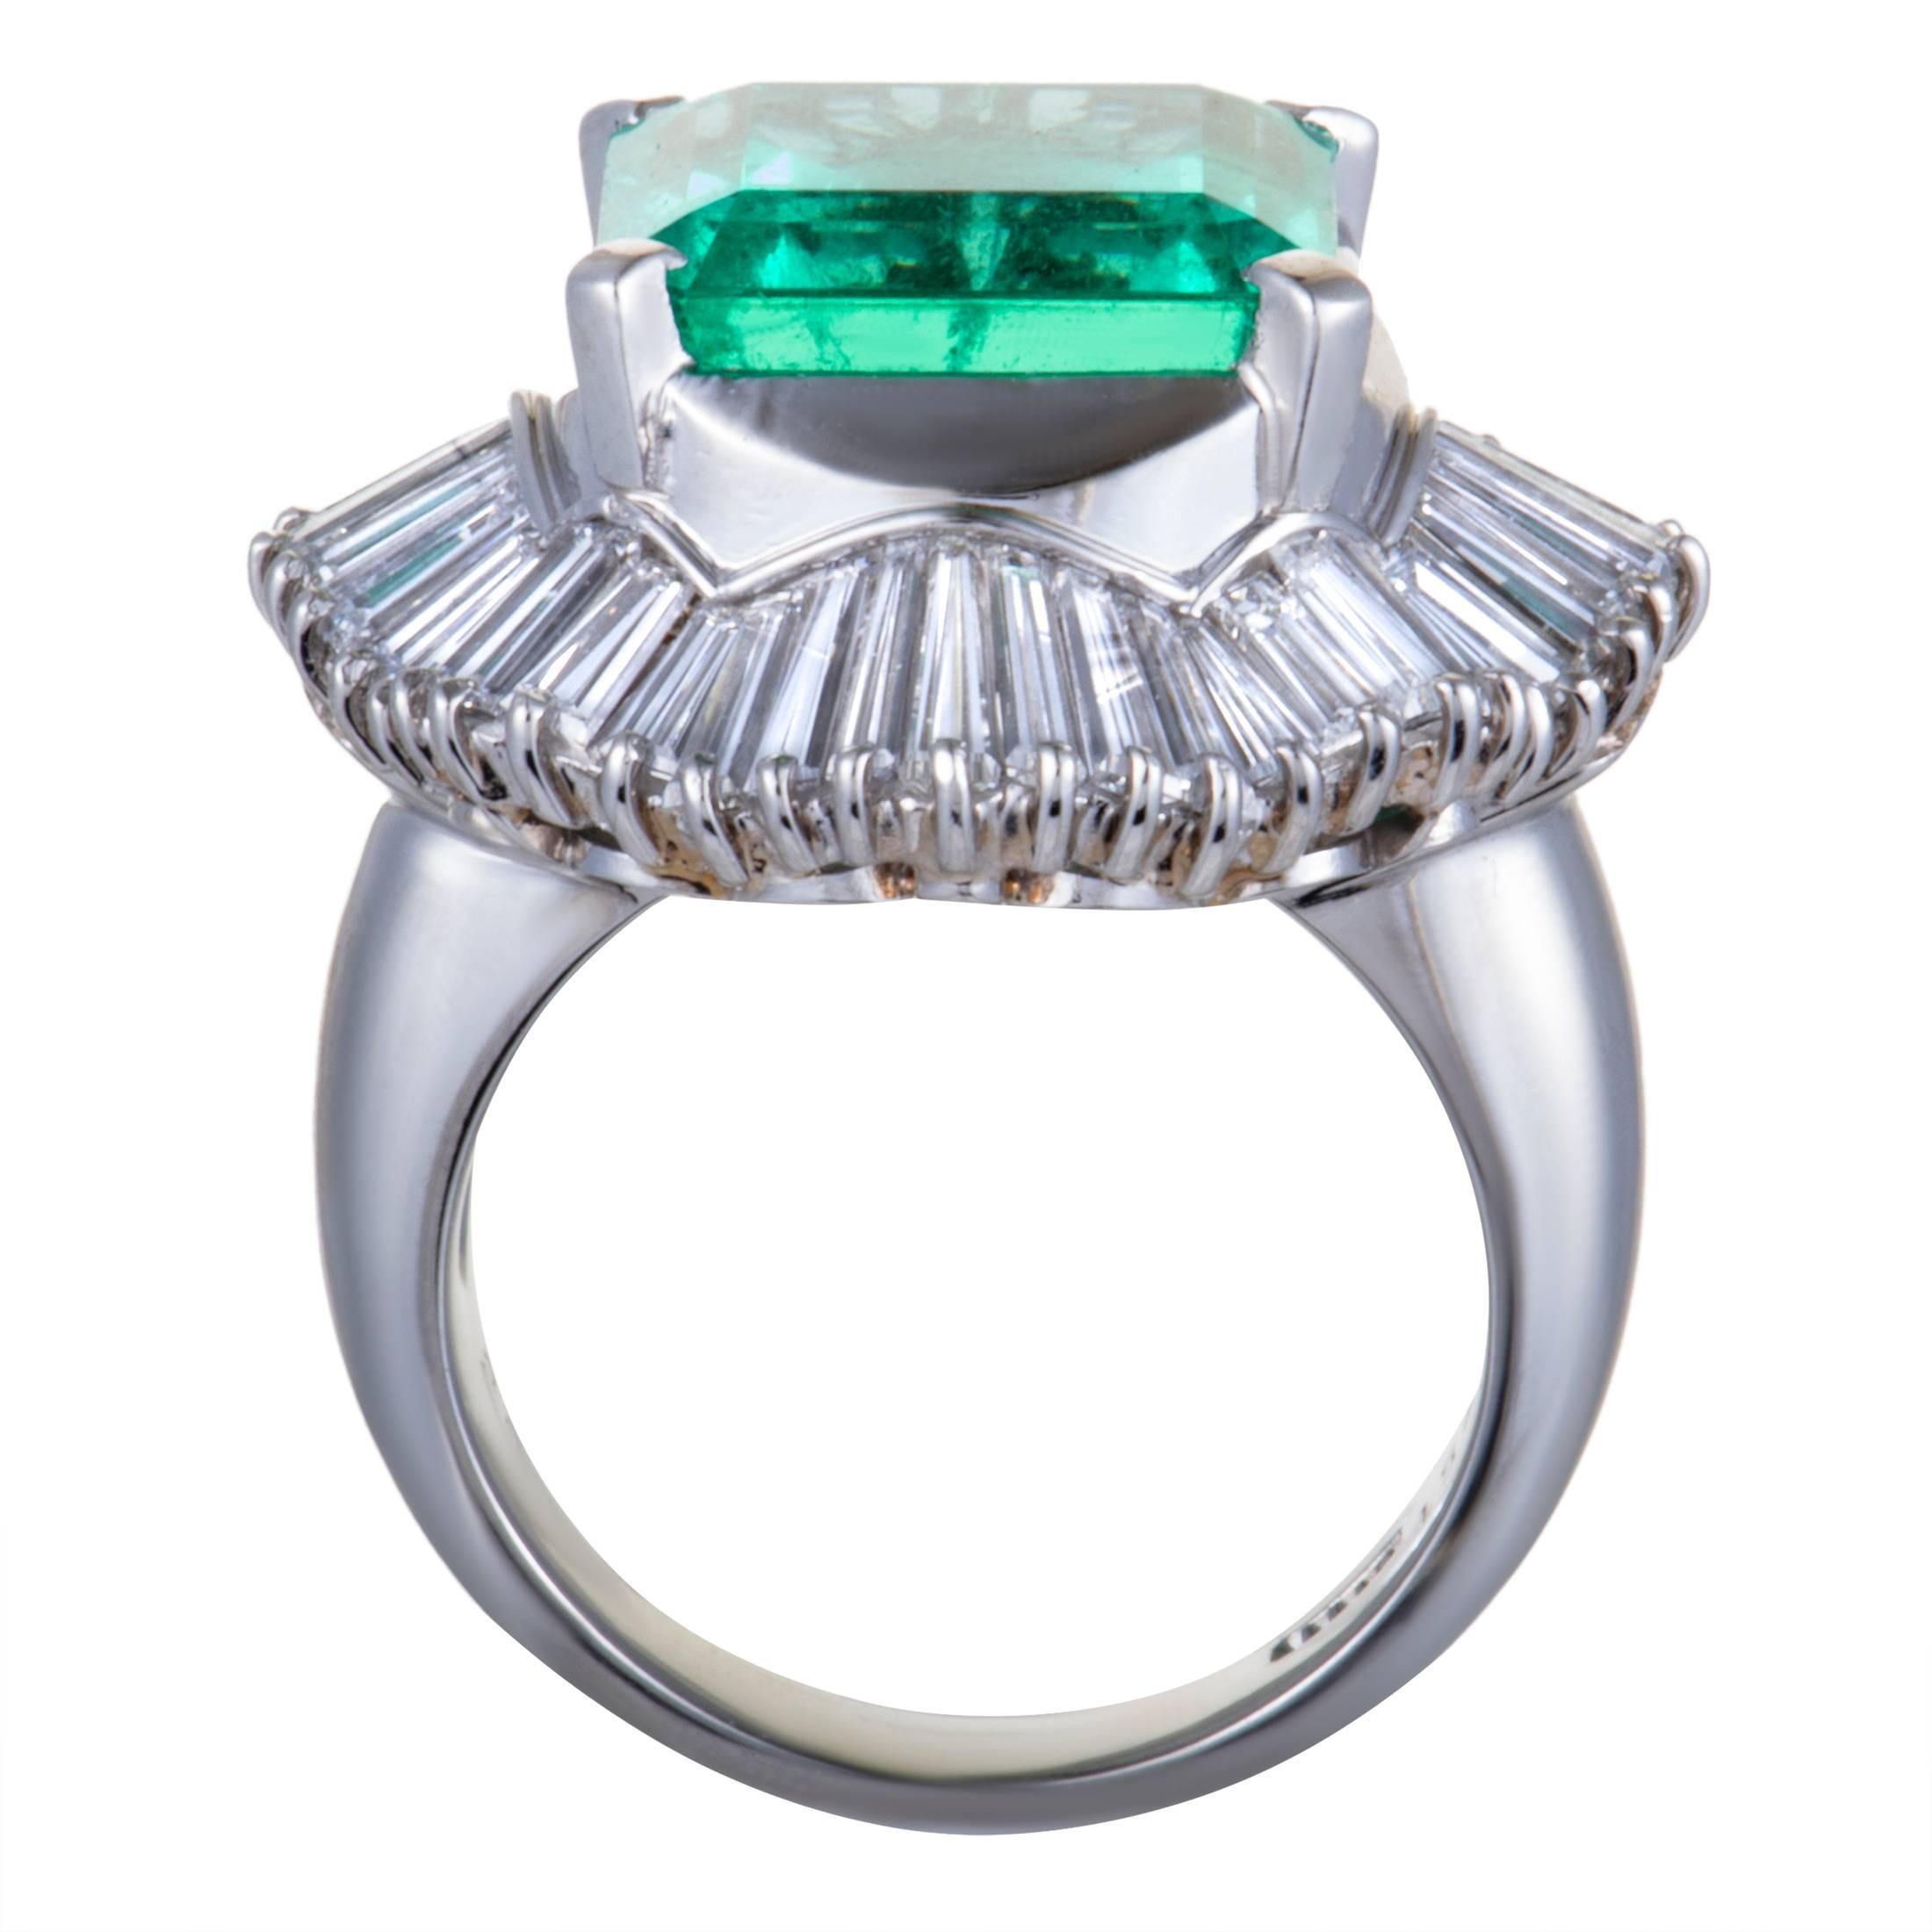 This mesmerizing ring features a classic design and compels with its luxurious décor. The fabulous ring is made of classy platinum and set with 2.93ct of sparkling diamonds around a captivating green emerald, weighing 7.51ct.
Ring Size: 5.75
Ring